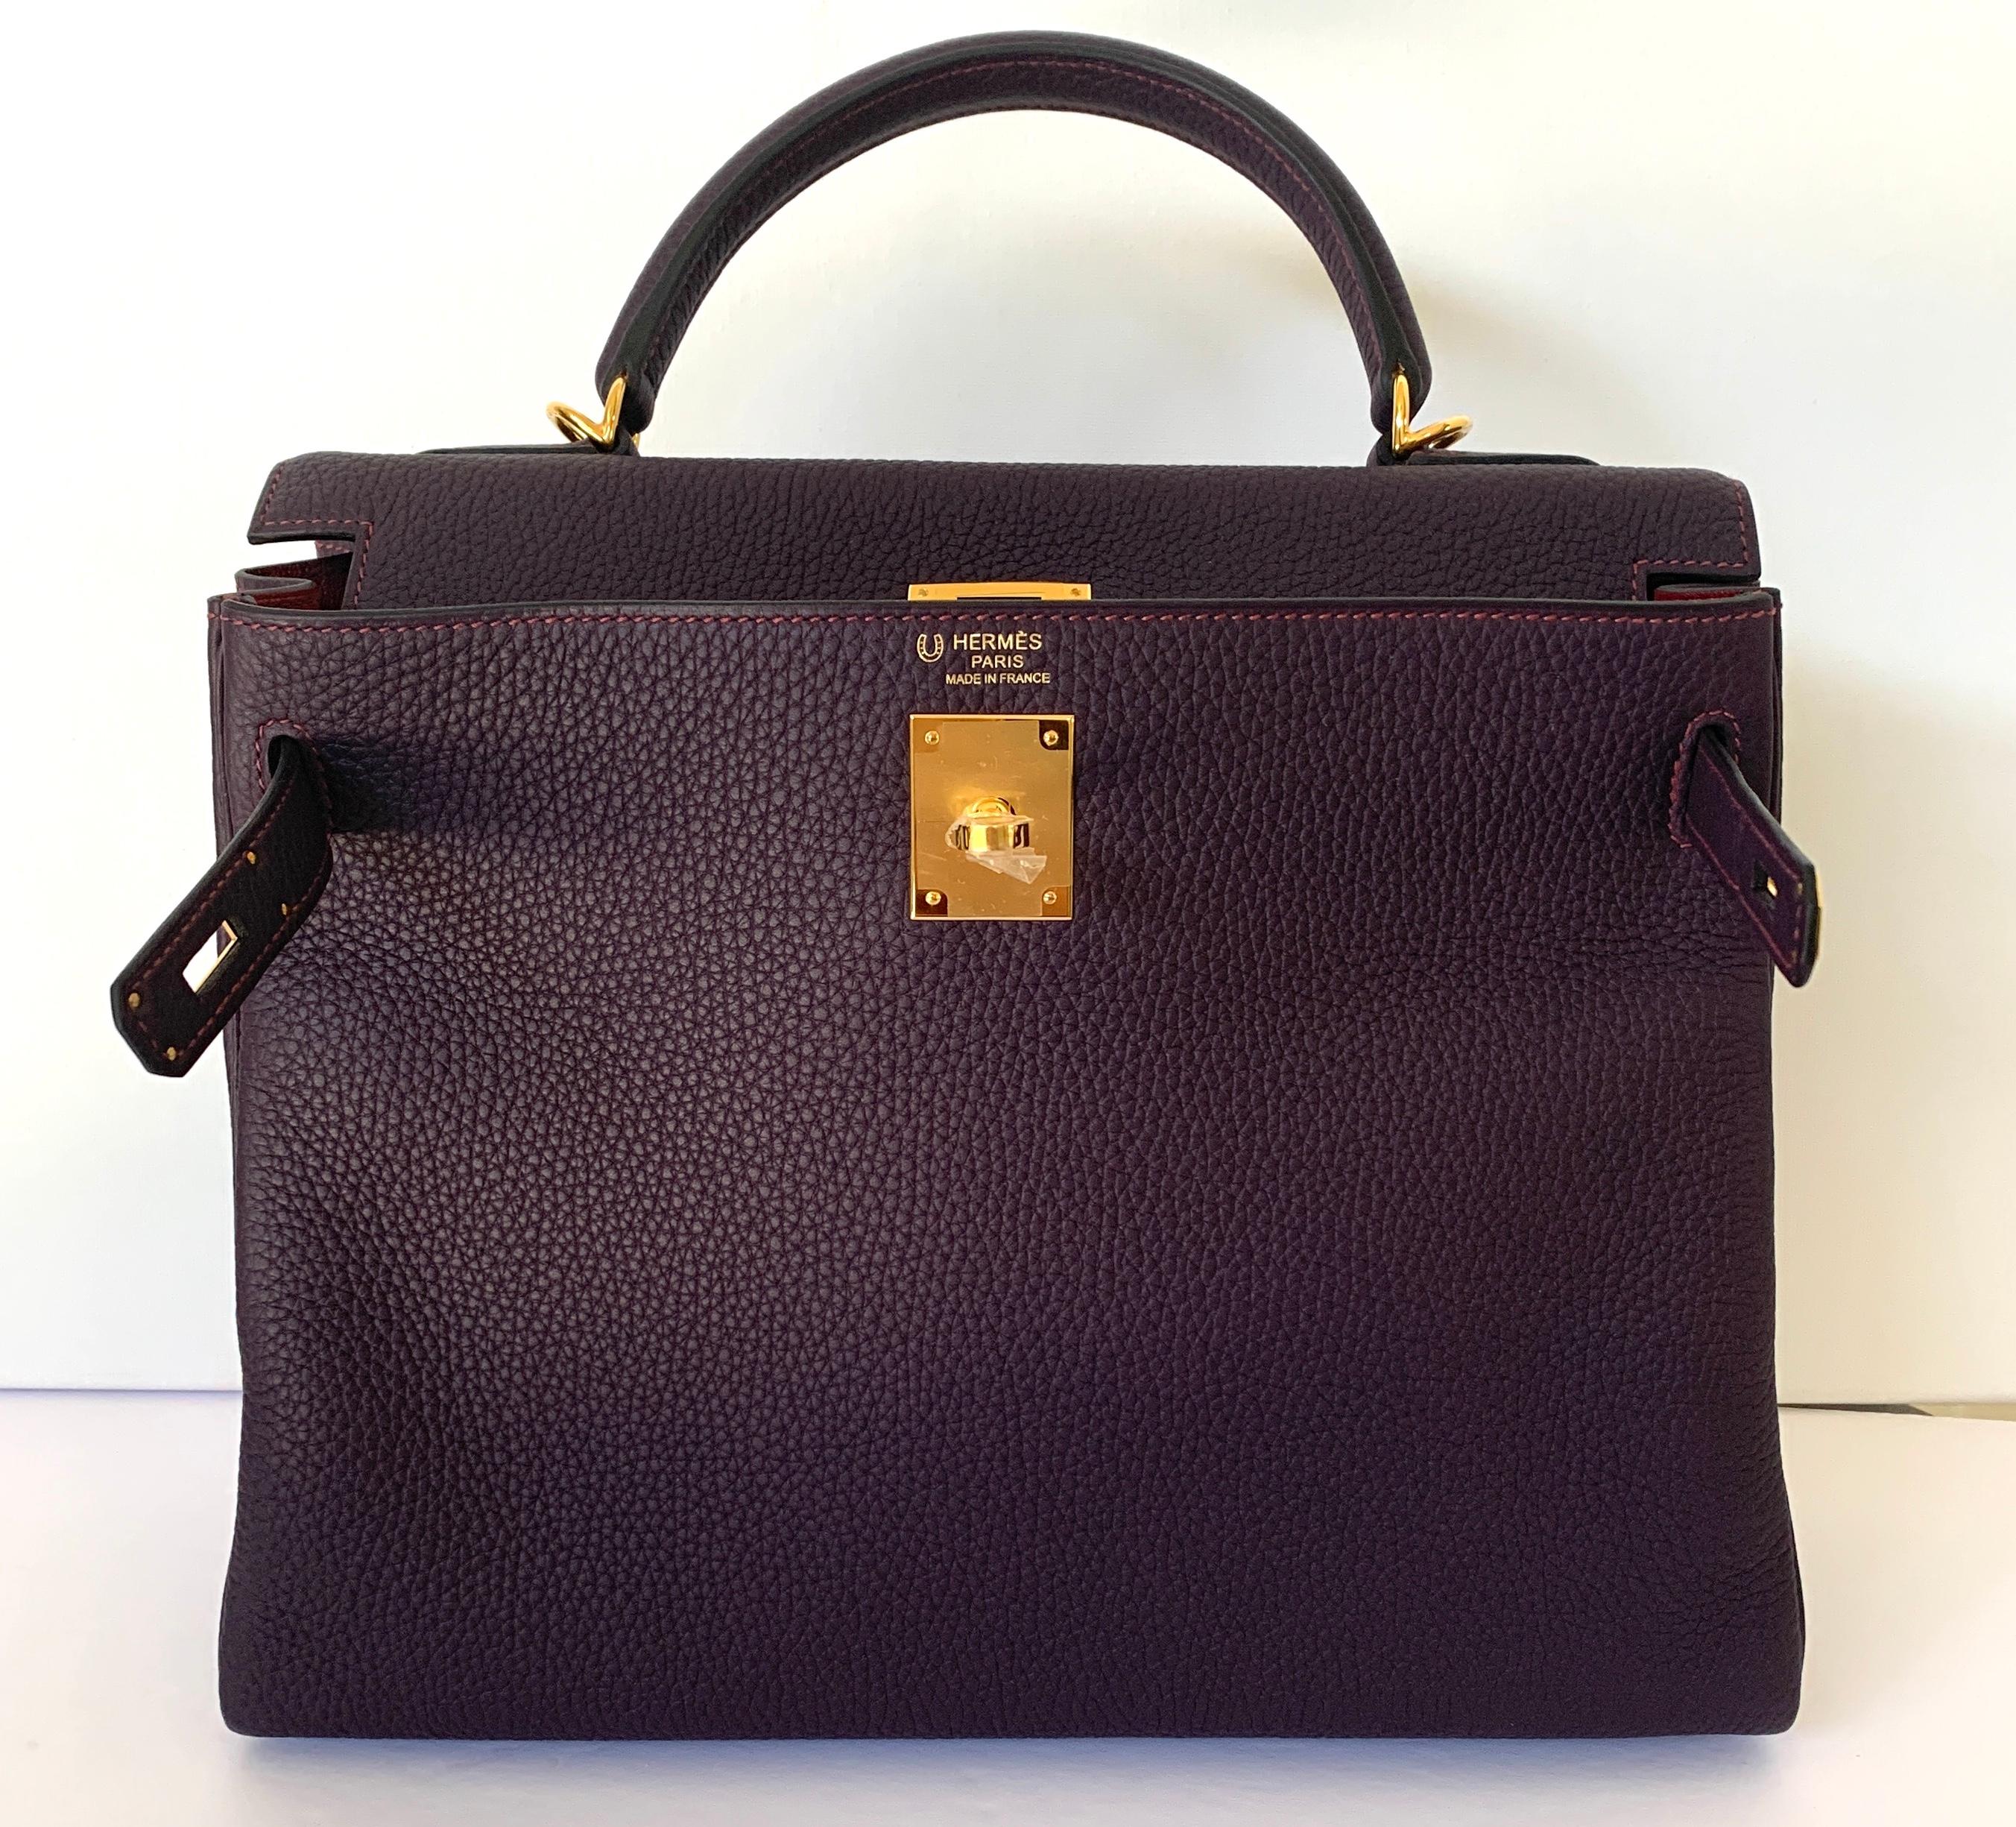 Hermes Special Order Kelly Bag
32Cm
Horseshoe stamp
2020 Y
Togo Leather
Raisin reintroduced color, always a favorite
A beautiful jeweltone! The camera does not capture how gorgeous and rich this color is
Set off with contrast pink topstitching, pink